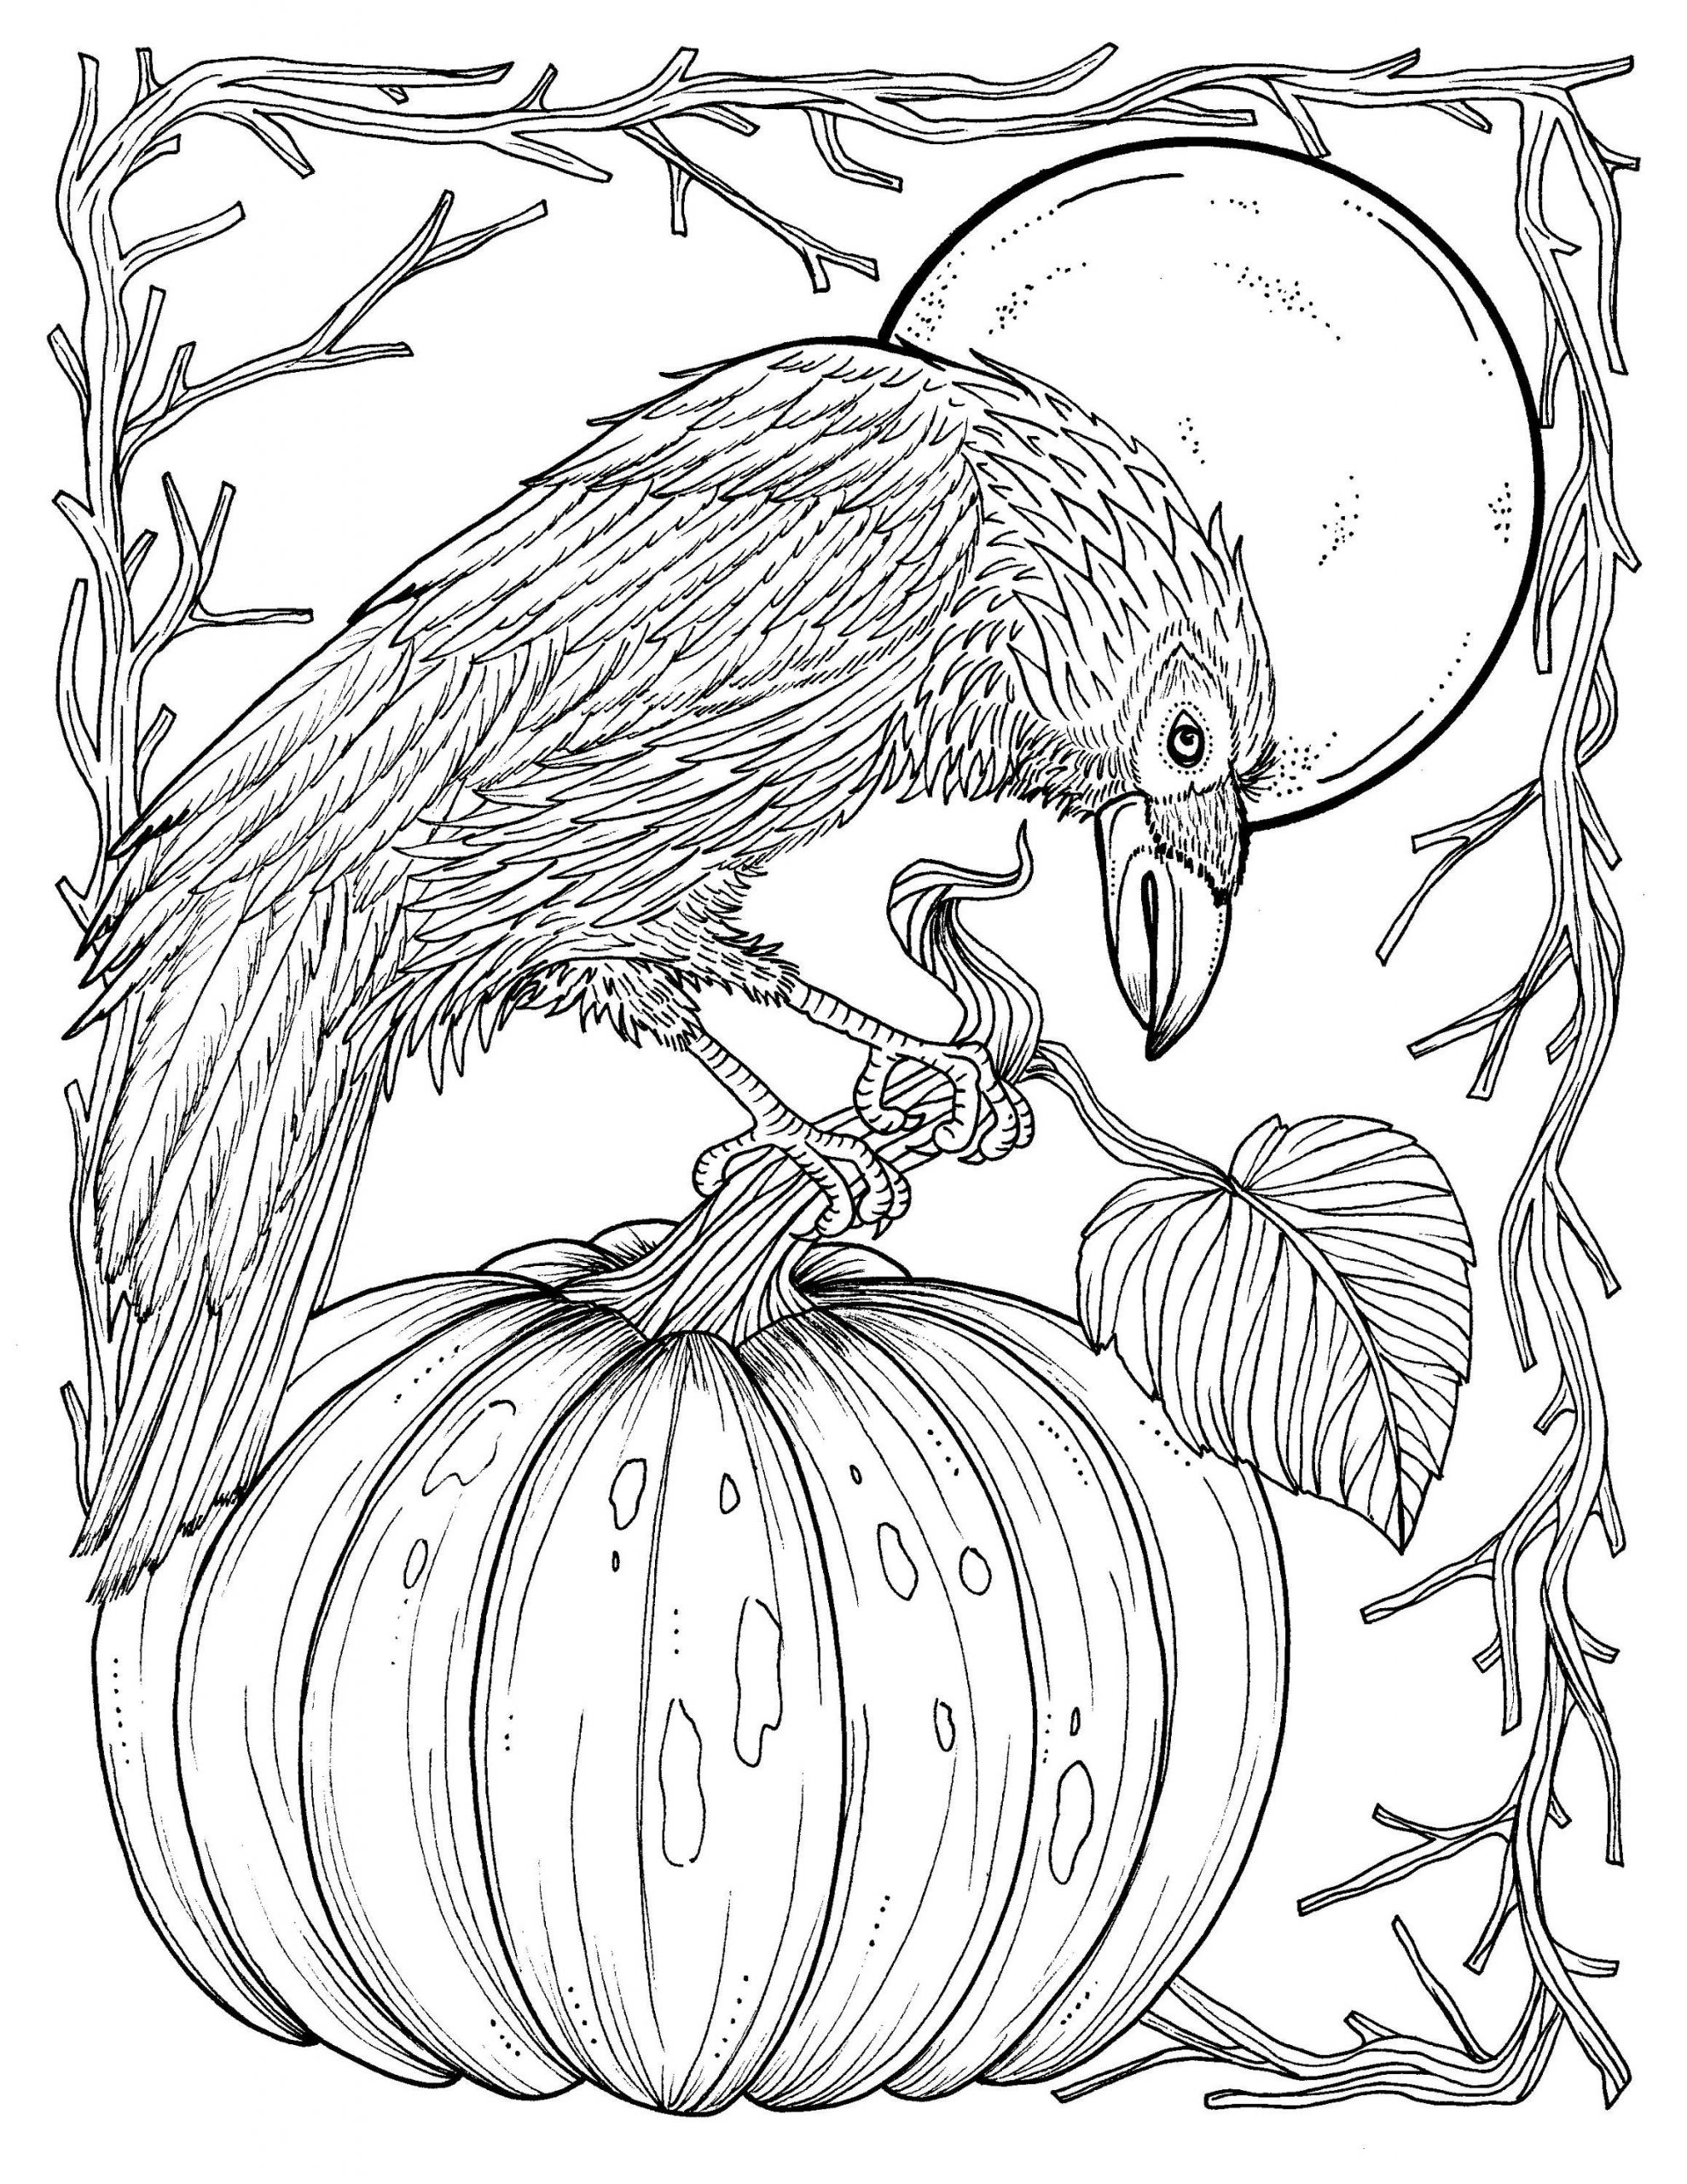 Autumn Coloring Pages For Adults
 Fall Crow Digital Coloring page Thanksgiving harvest Adult